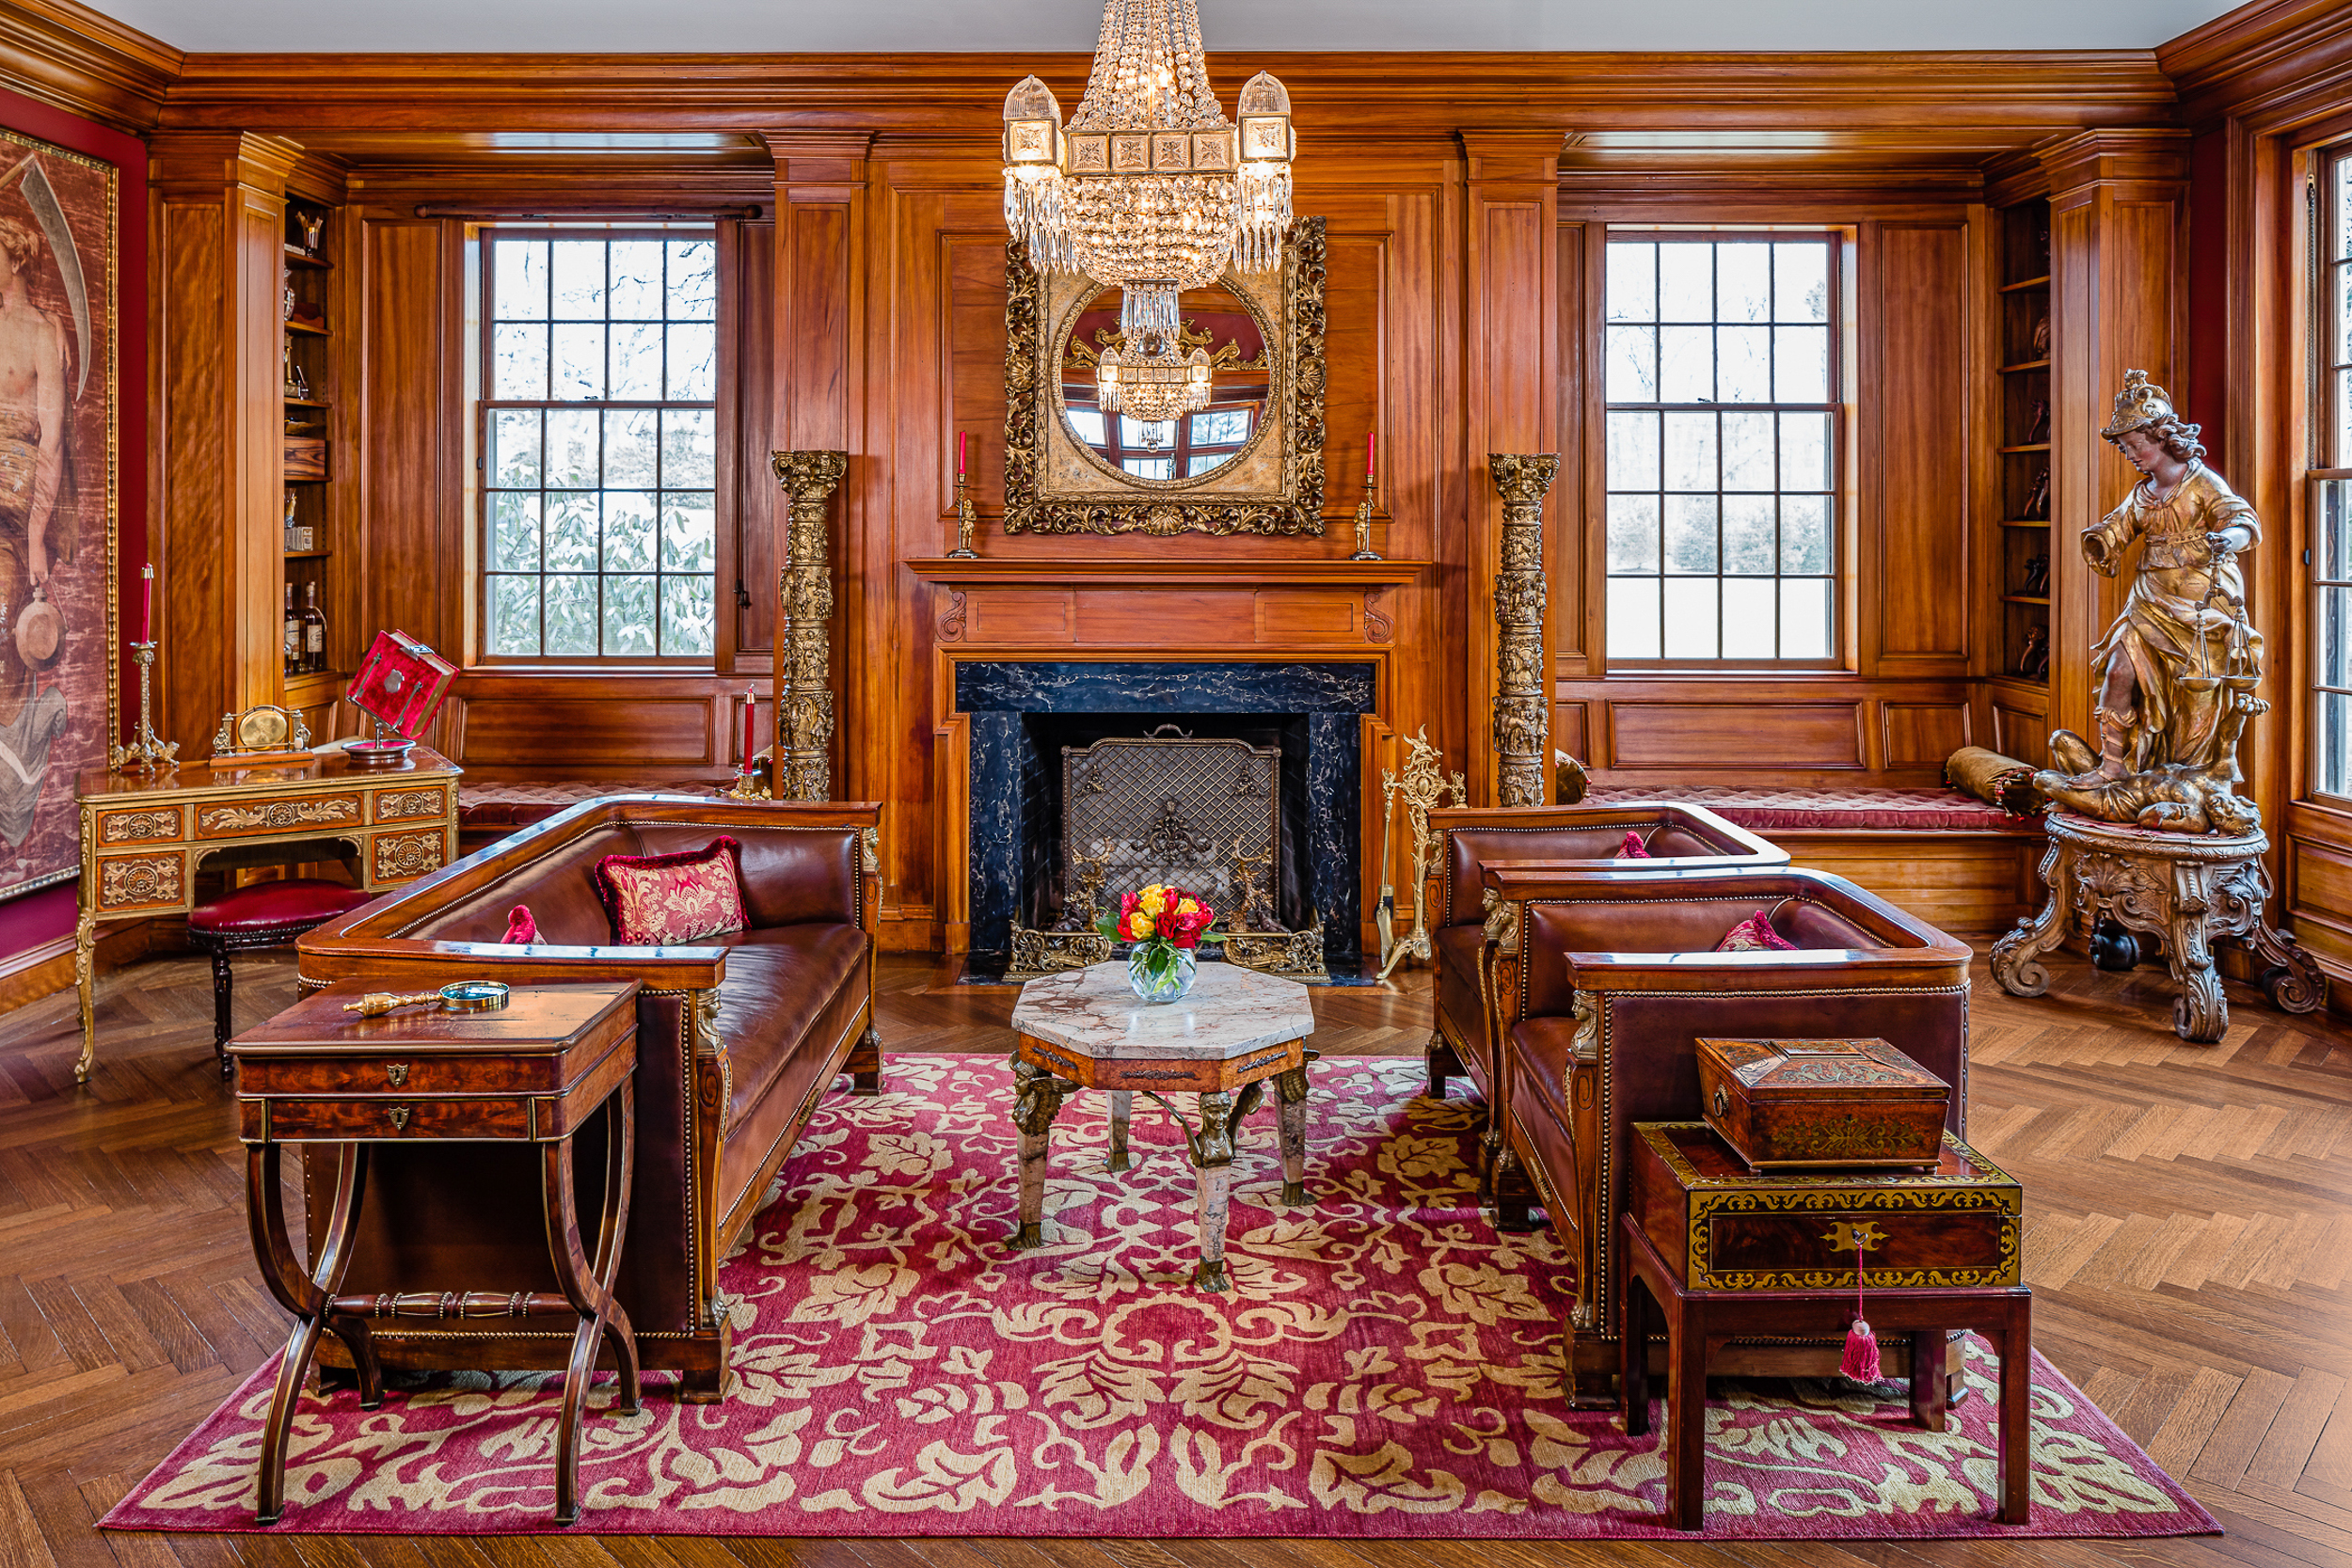 Philip Cheney Mansion library. Manchester, CT